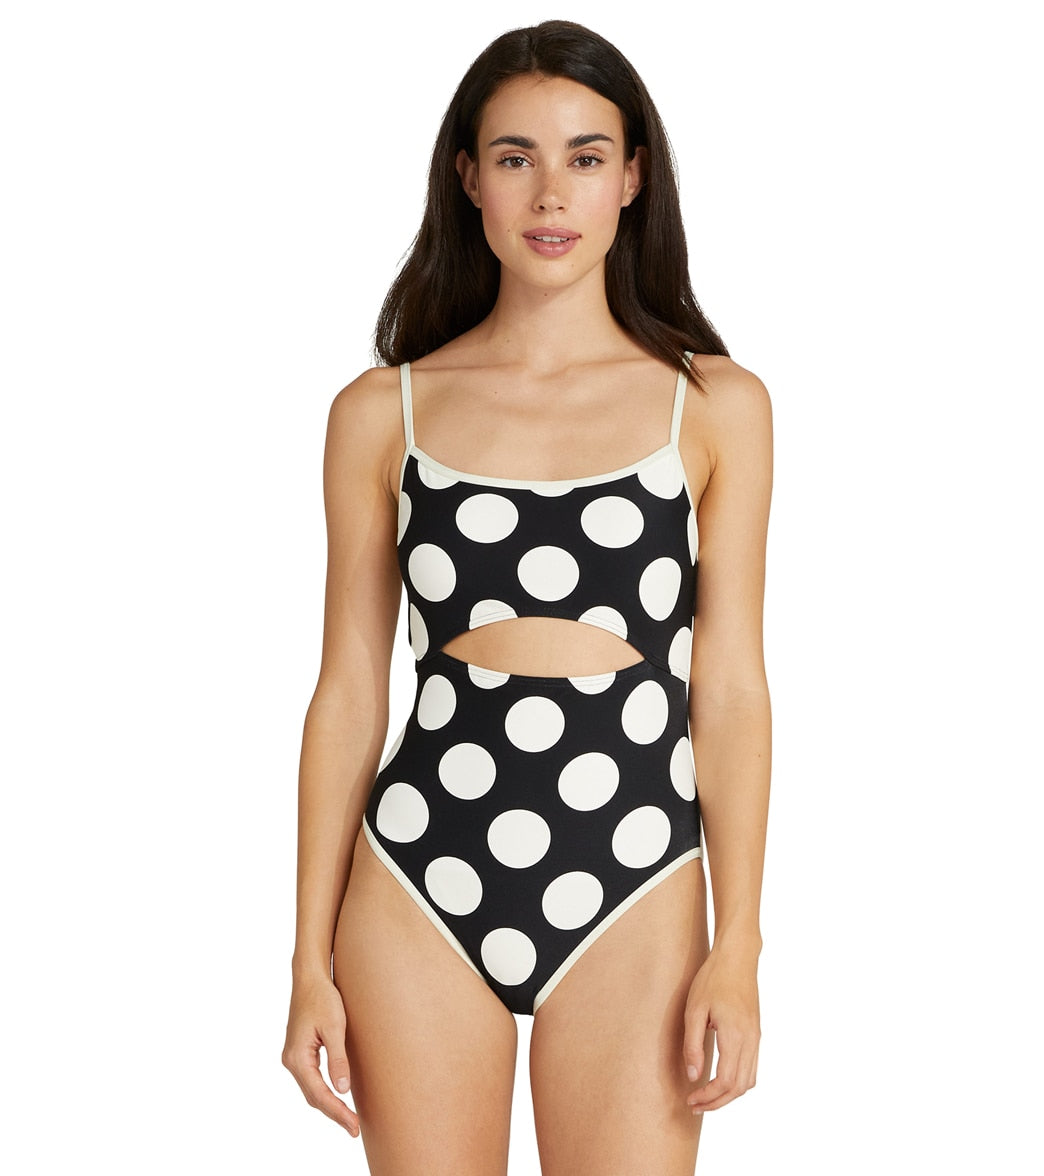 Kate Spade New York Womens Large Dots Cut Out One Piece Swimsuit